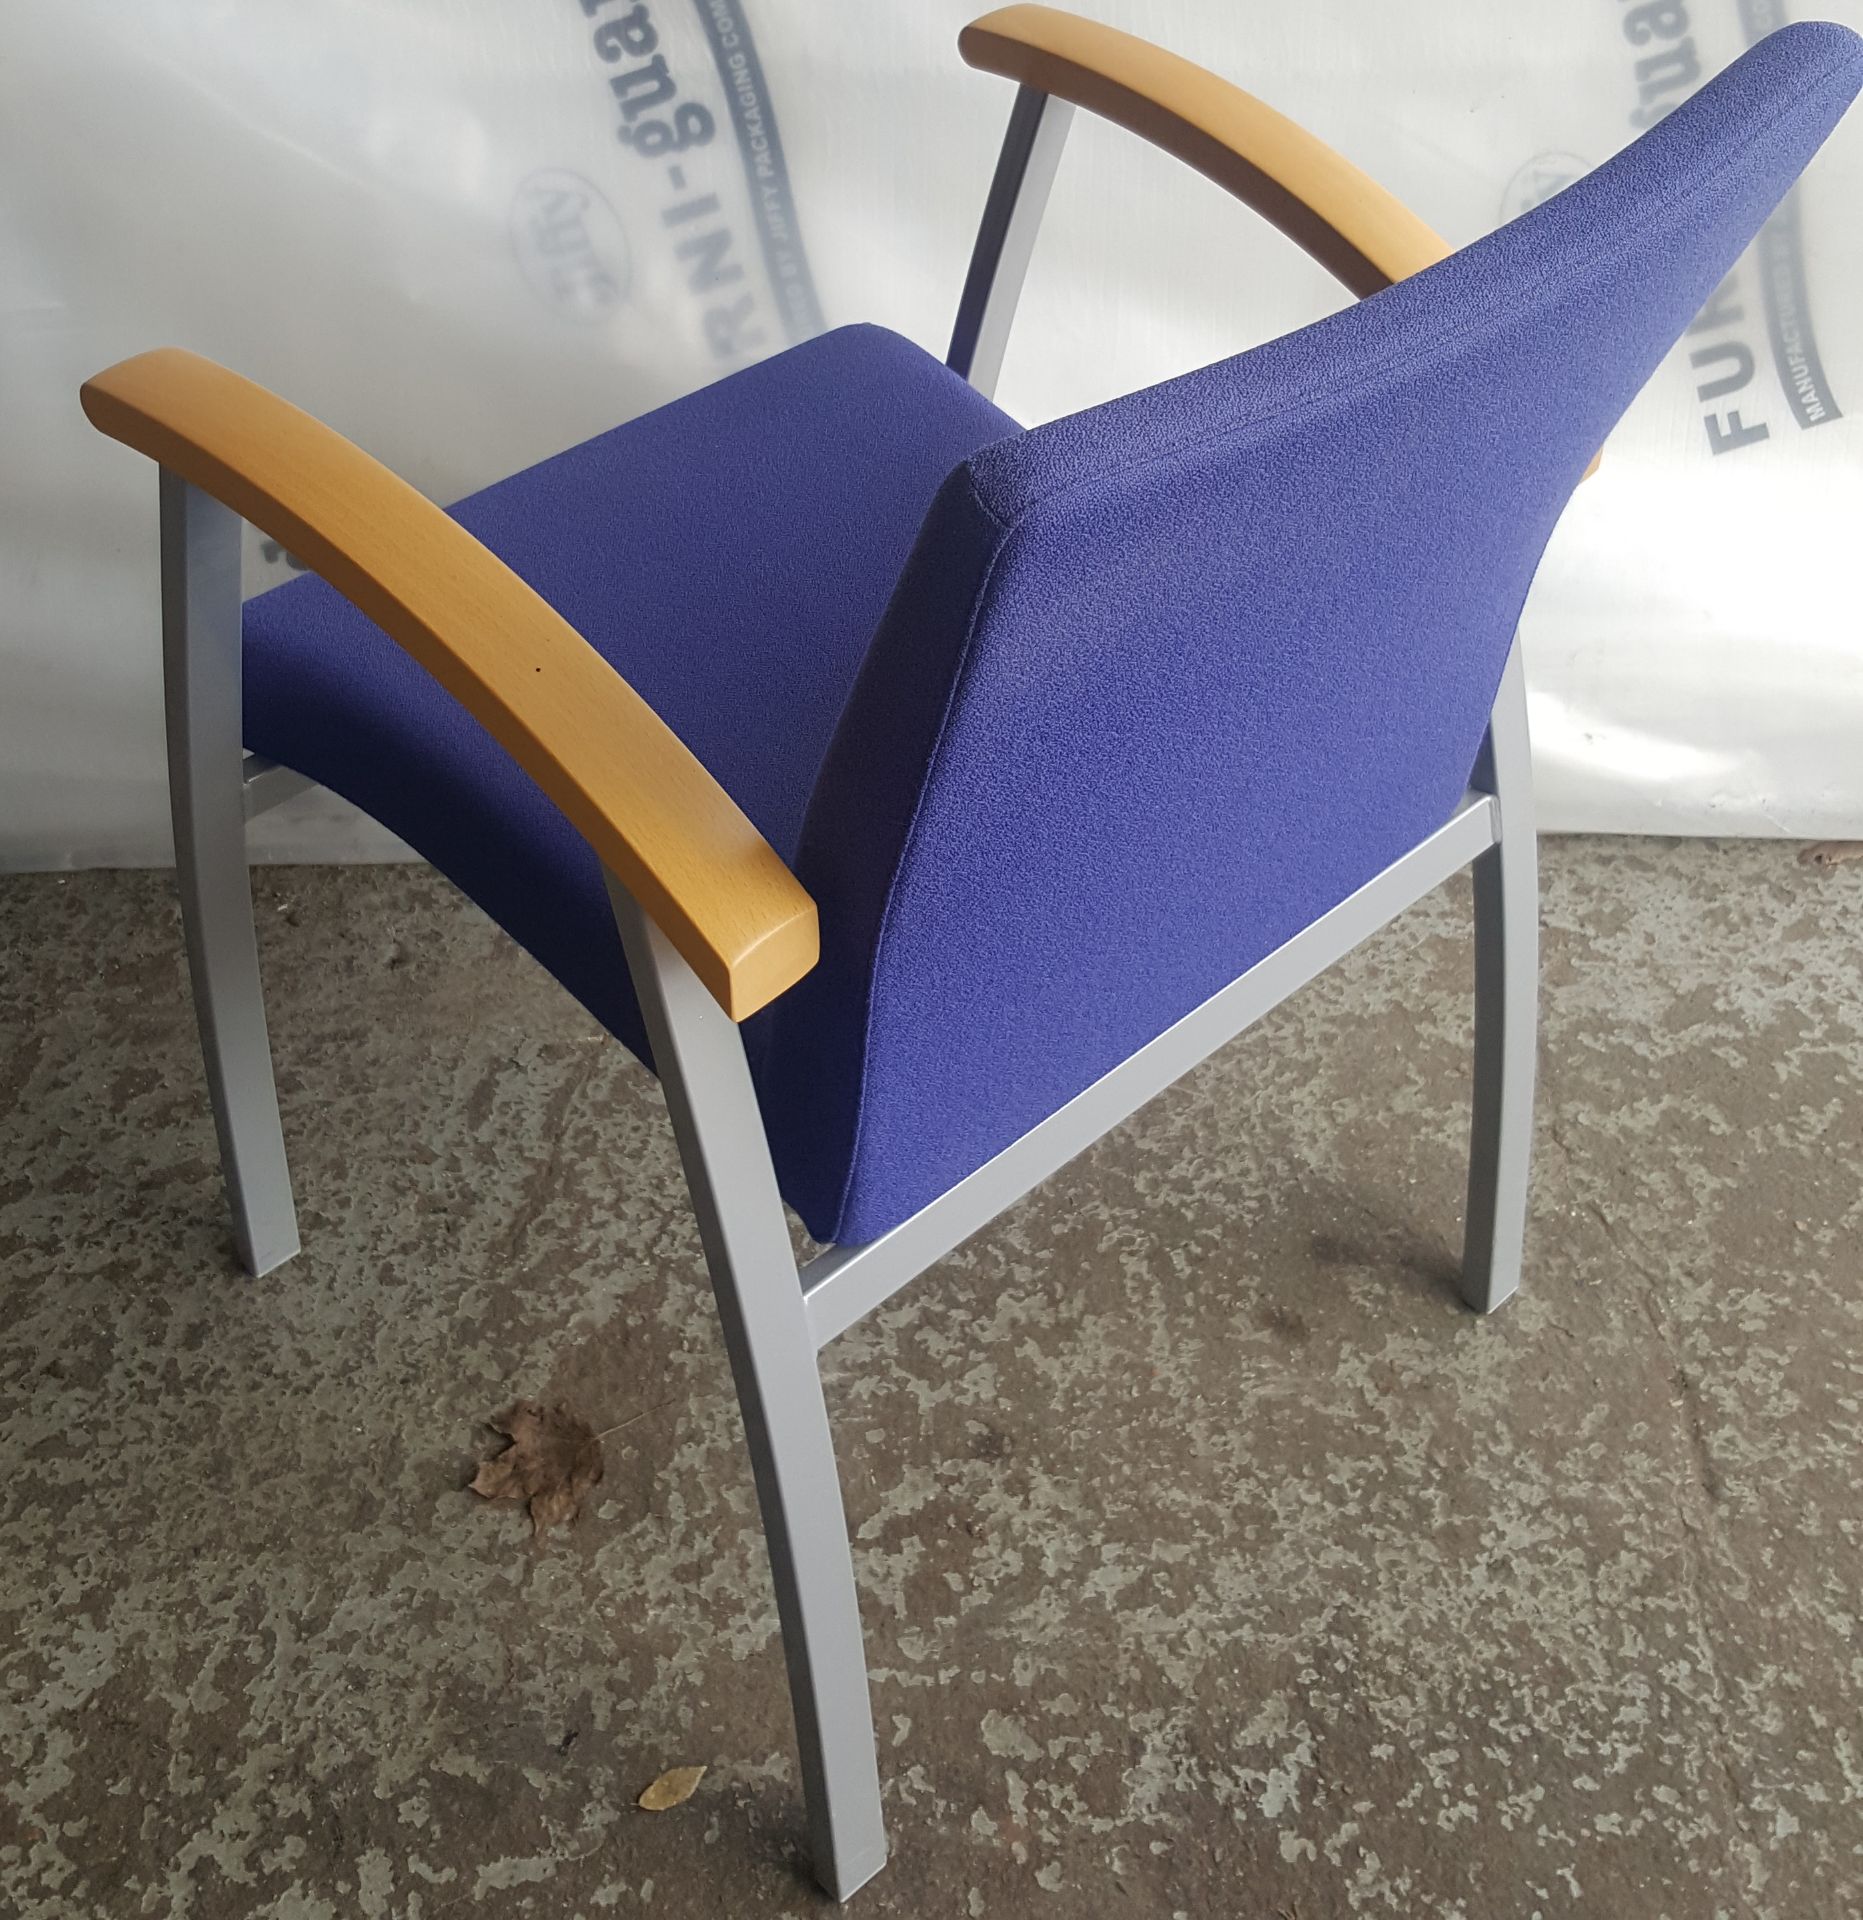 6 x Royal Blue Fabric Stackable Office Chairs - REF: TofT - CL011 - Location: Altrincham WA14 - Image 4 of 6